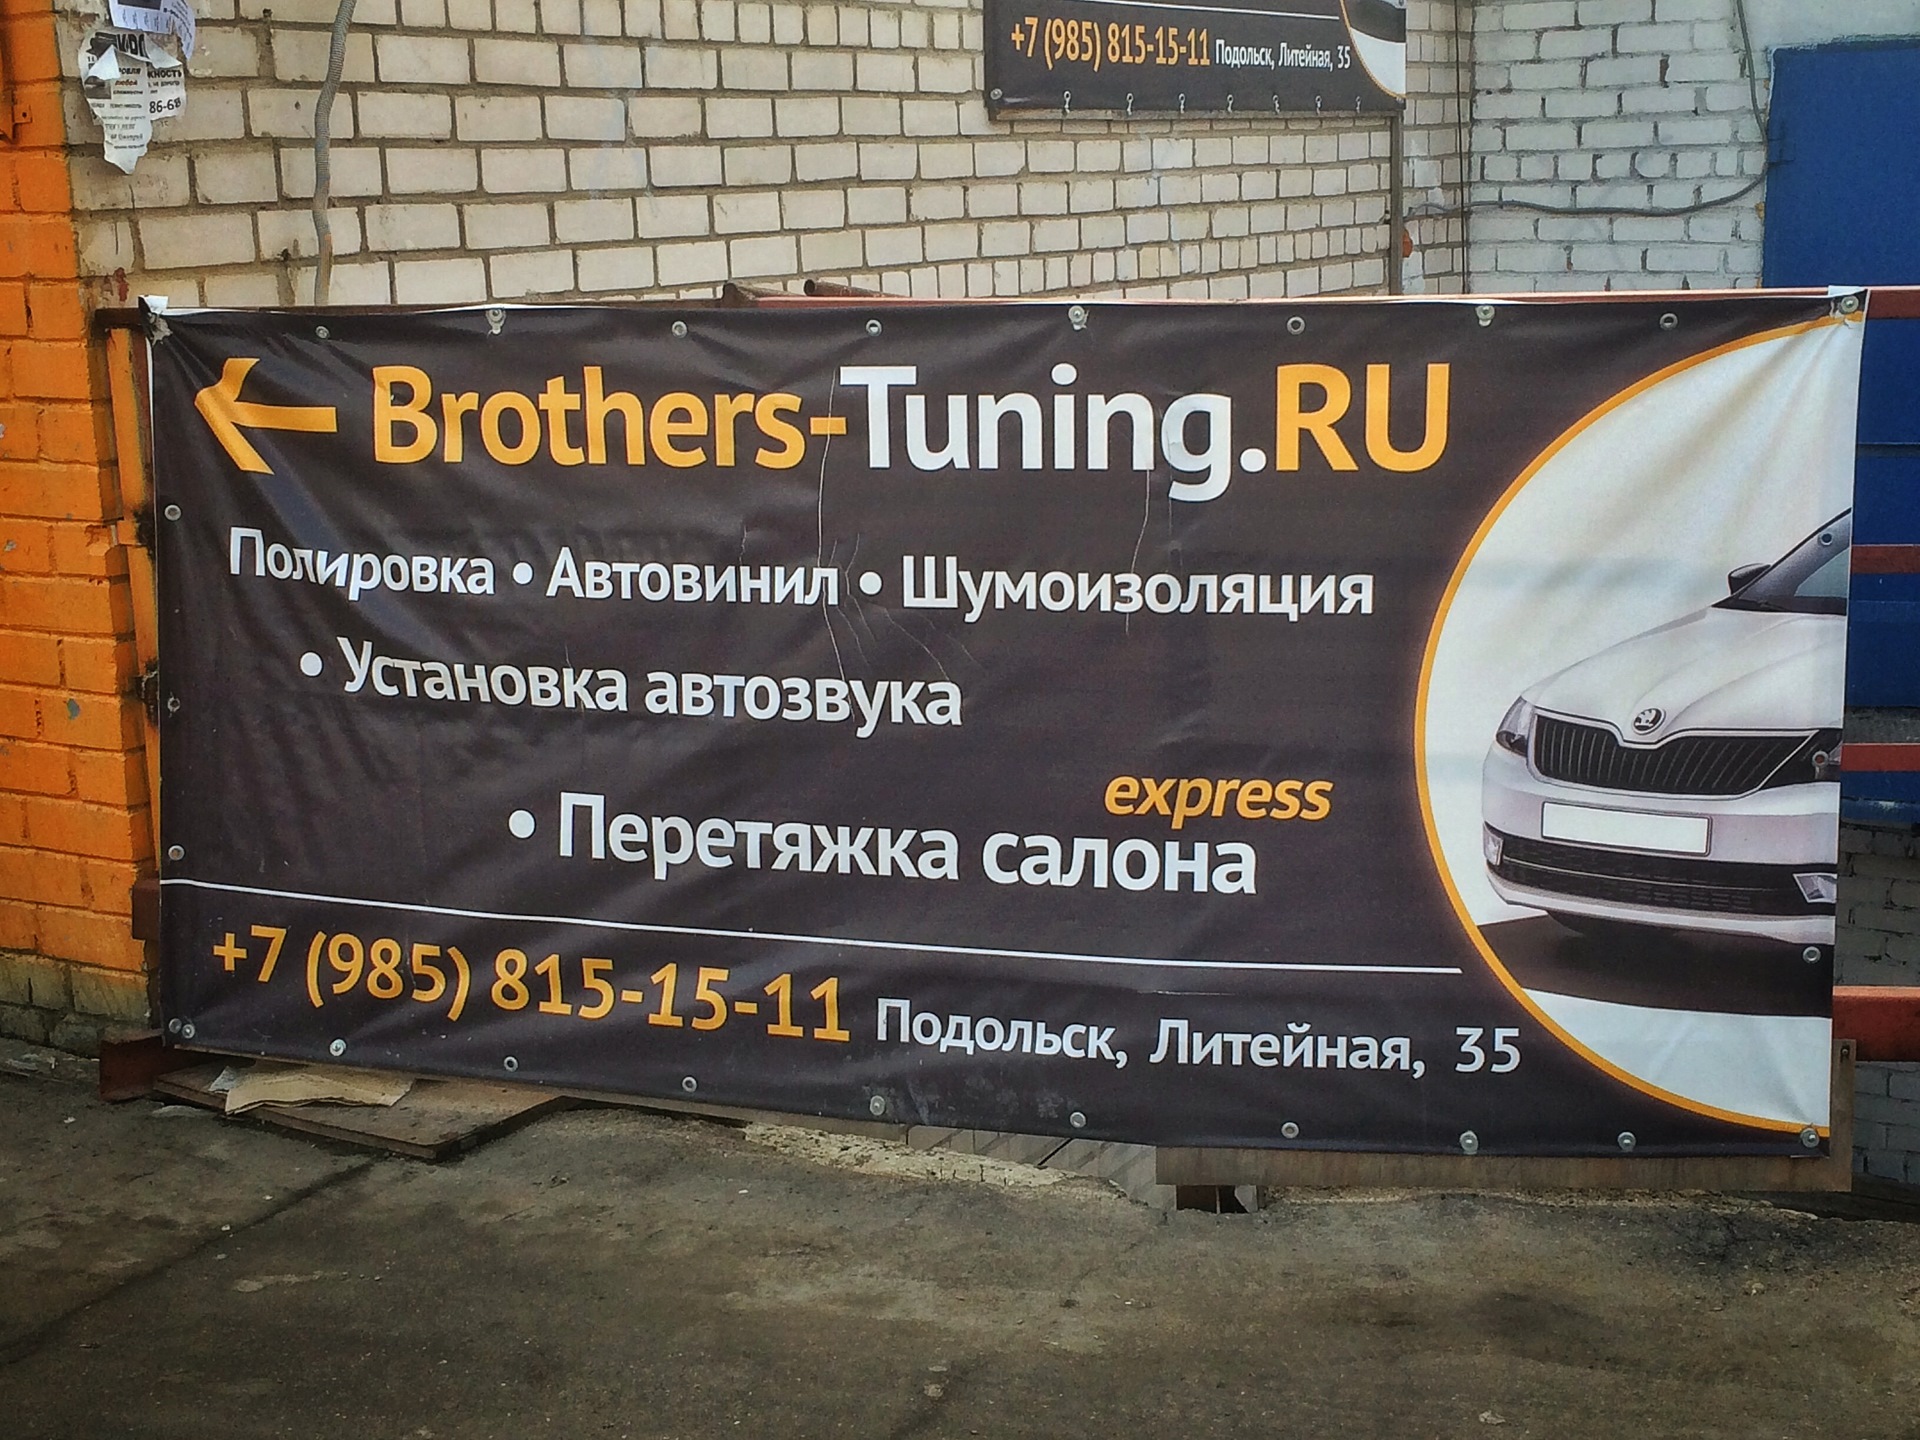 Brothers tuning